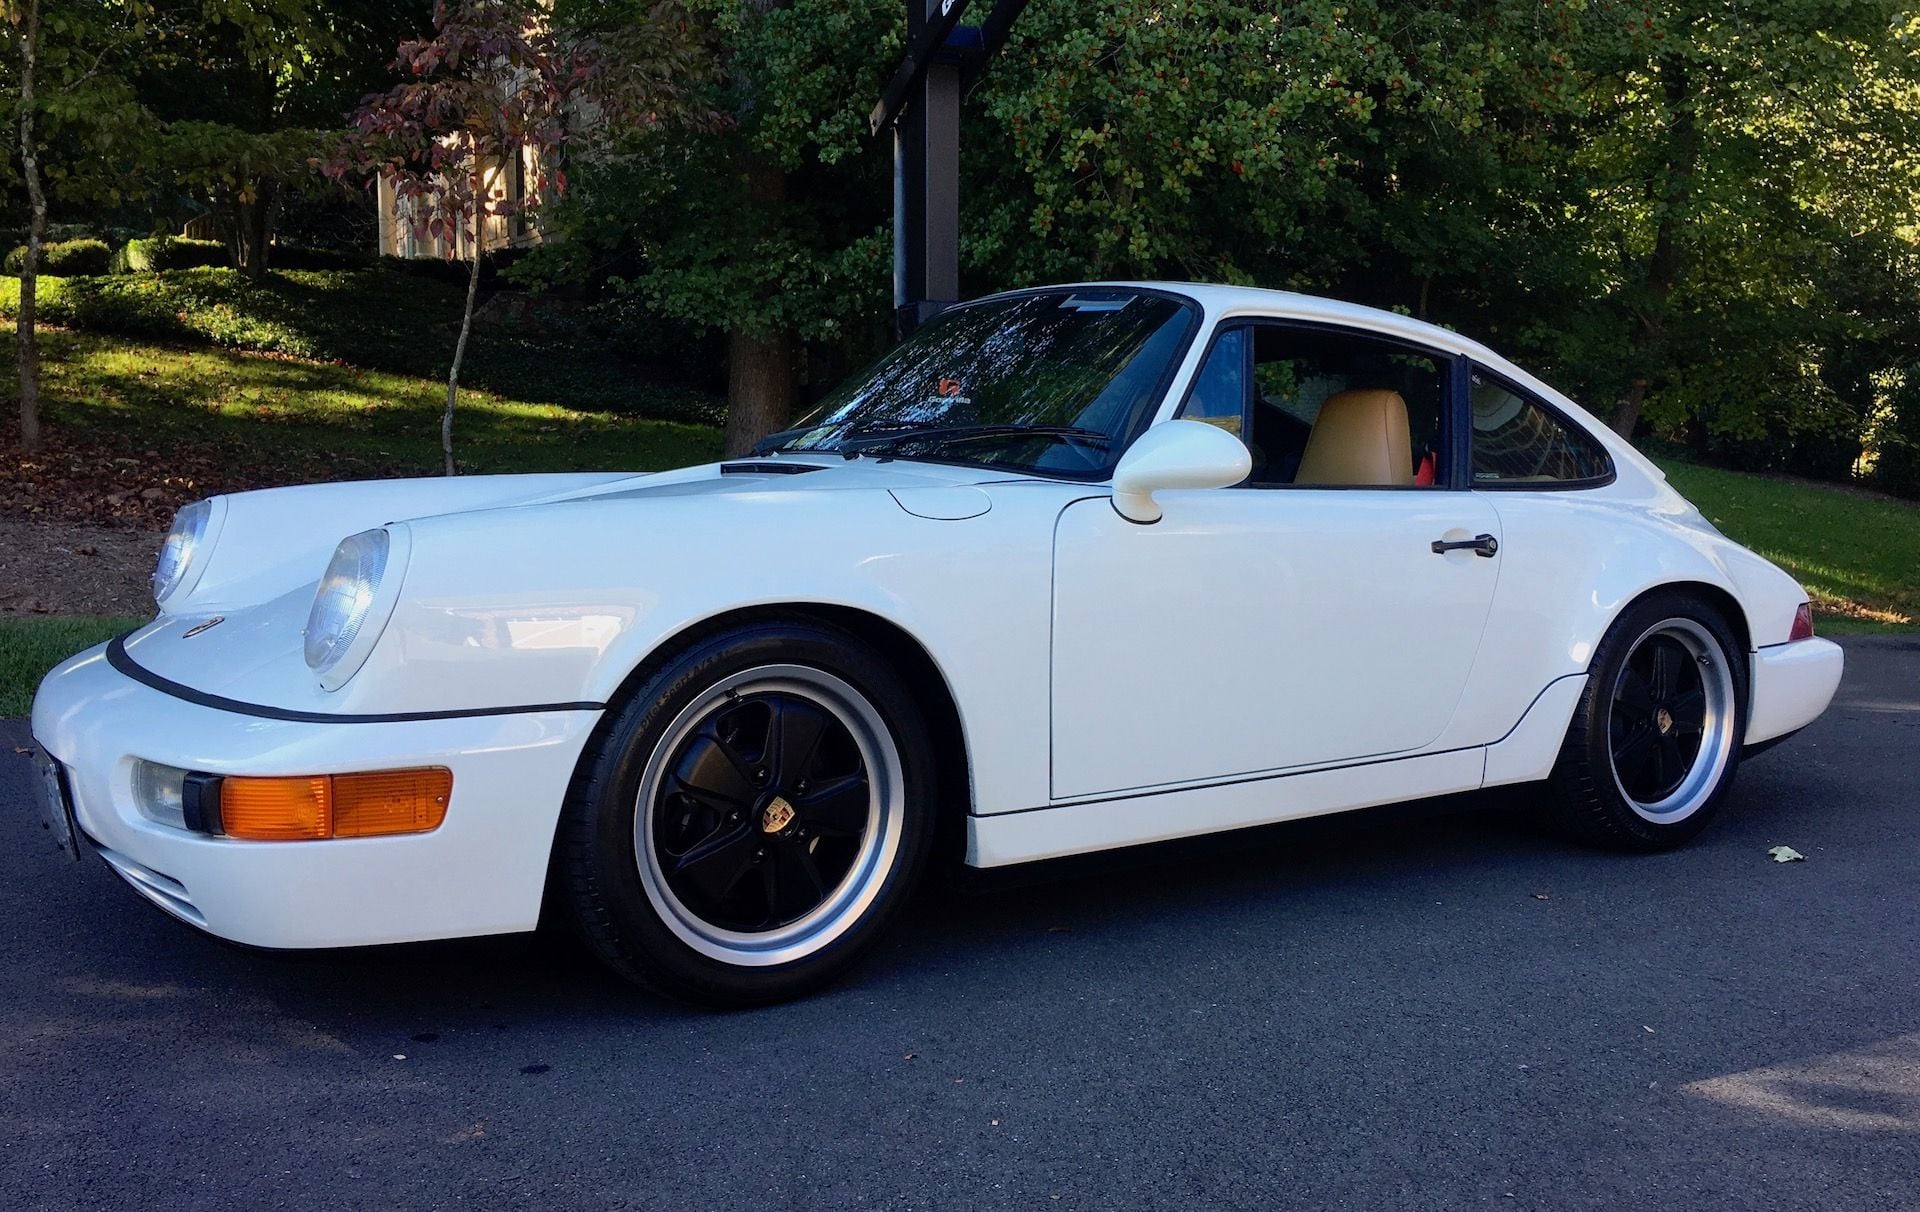 1993 Porsche 911 - 964 C4 Manual Coupe, 3.8L, Very Well Sorted - Used - VIN WP0AB2968PS420167 - 138,000 Miles - 6 cyl - 4WD - Manual - Coupe - White - Northern Virginia, VA 22124, United States